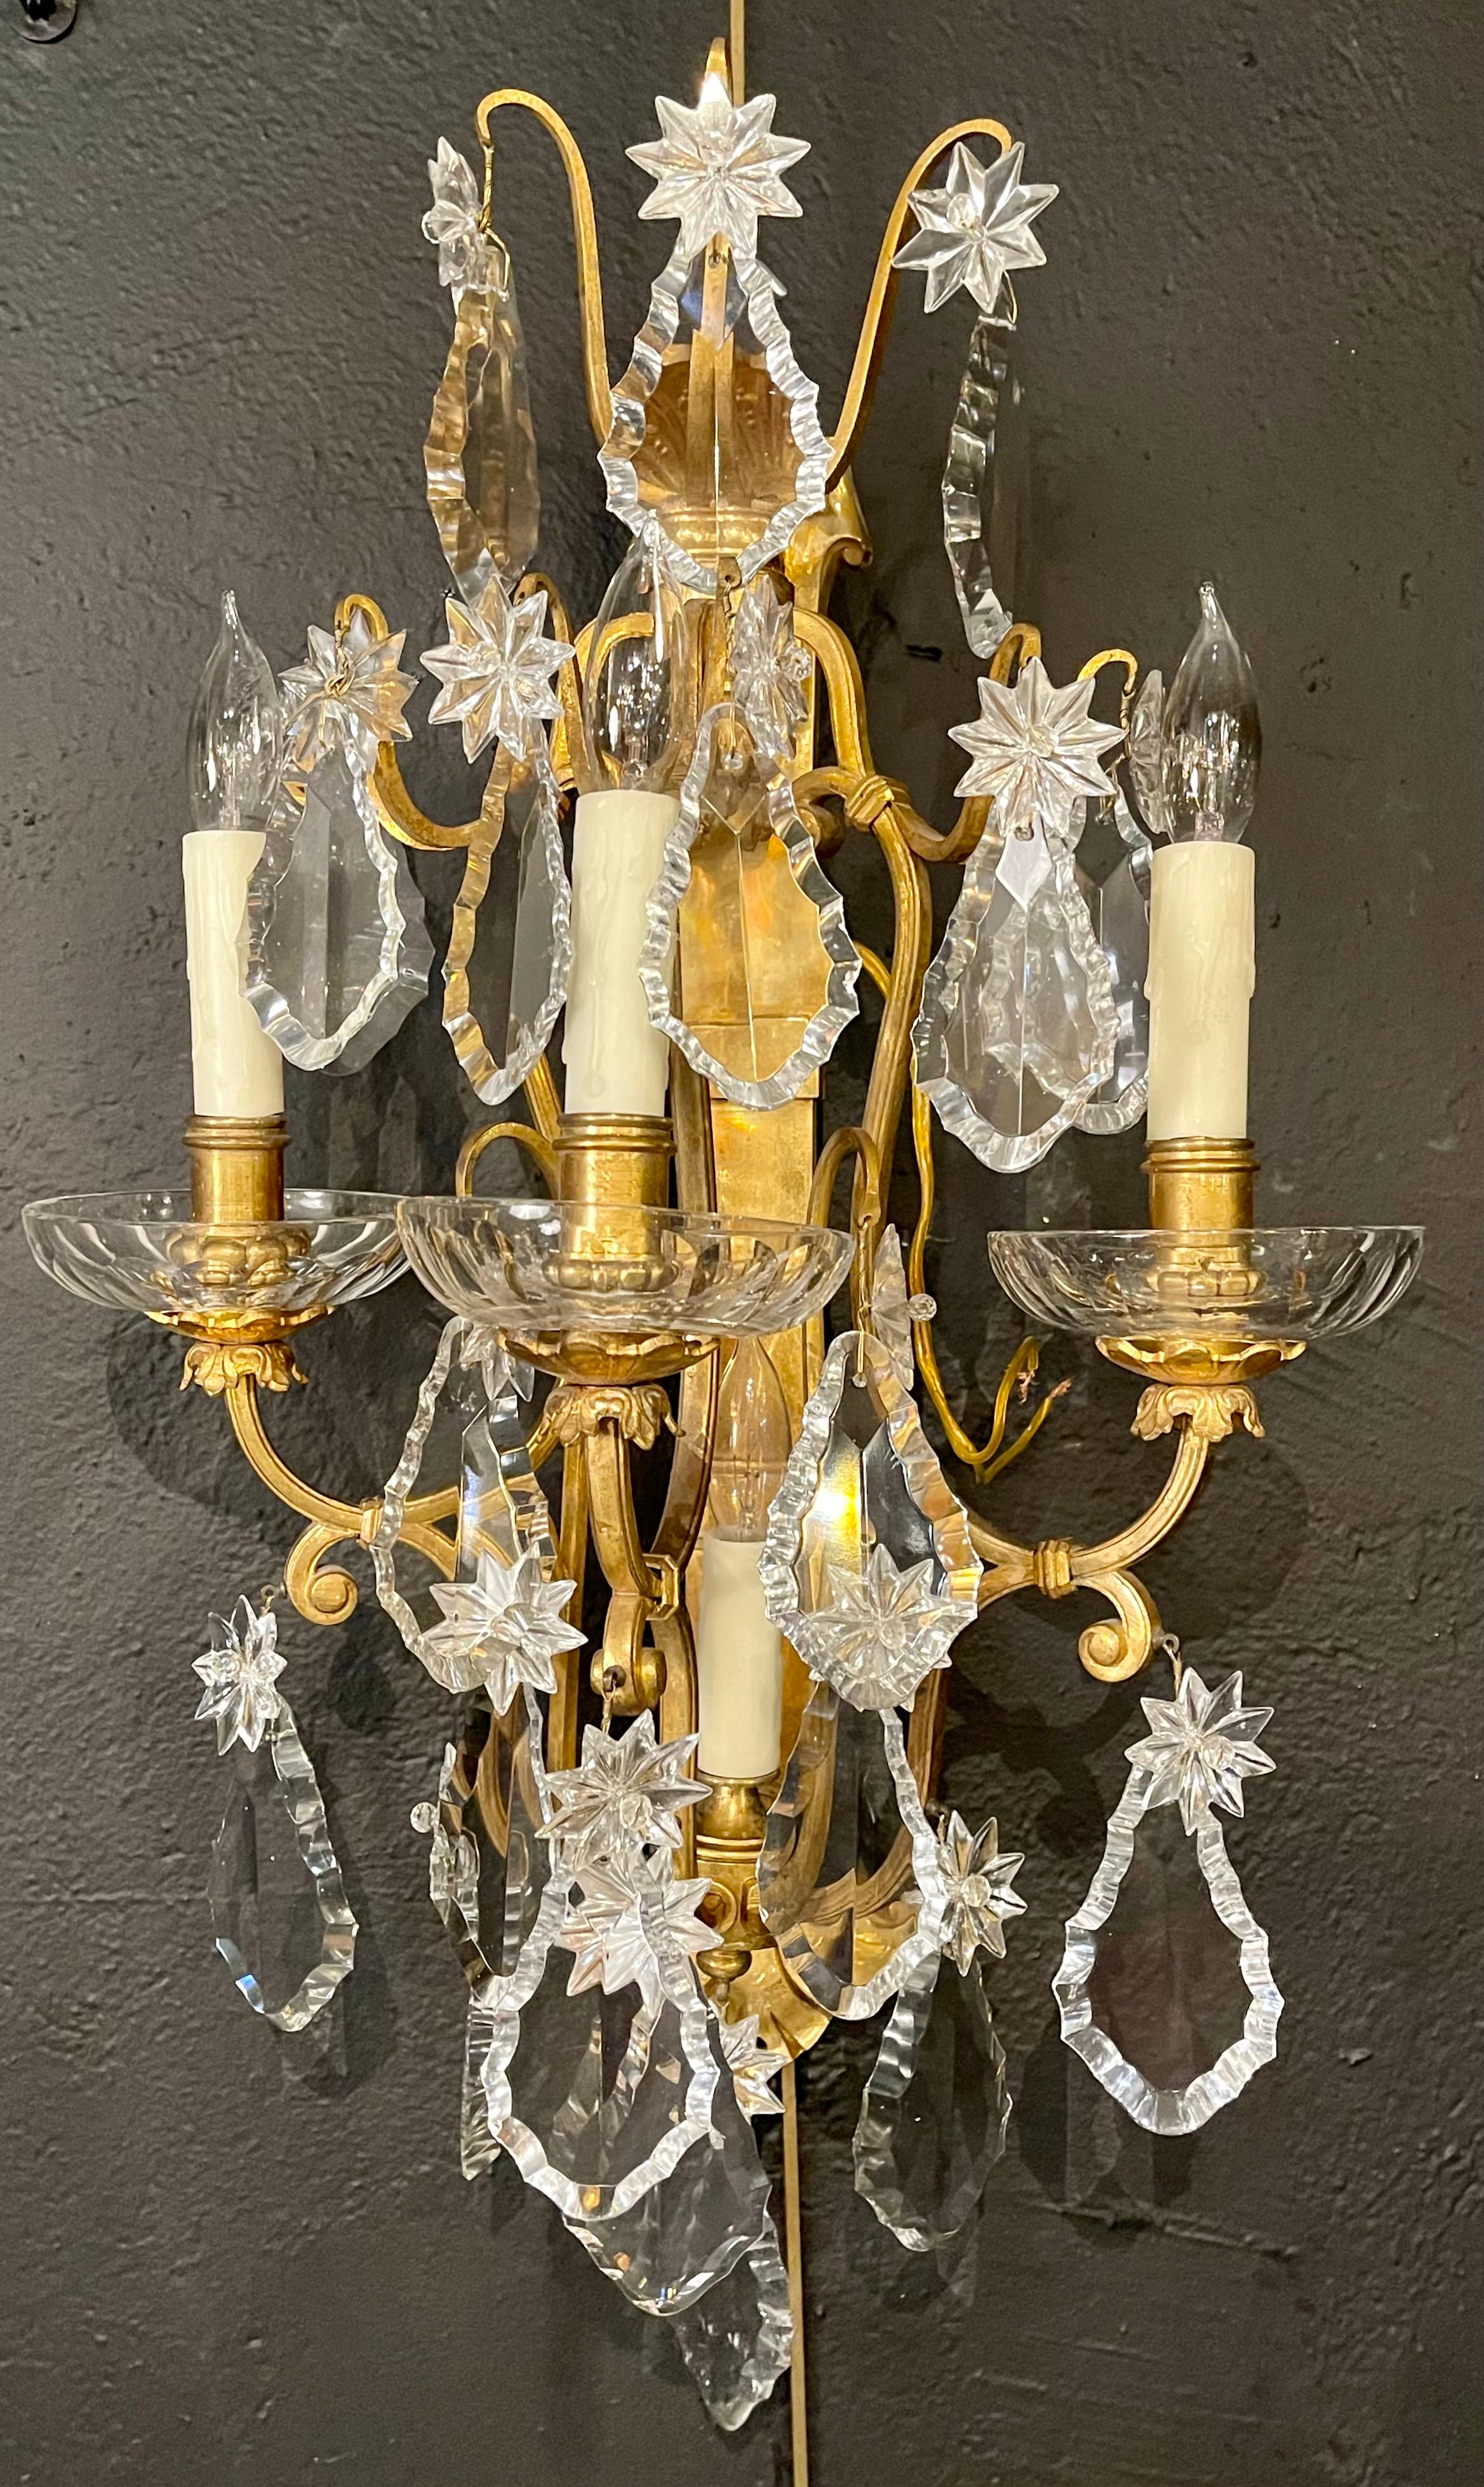 Pair of bronze and crystal wall sconces or lights. 3-light are wired onto this finely framed pair of solid bronze and finely cut crystal wall sconces. Pair of heavy bronze shell and floral designed back plates with large crystals and floral crystals